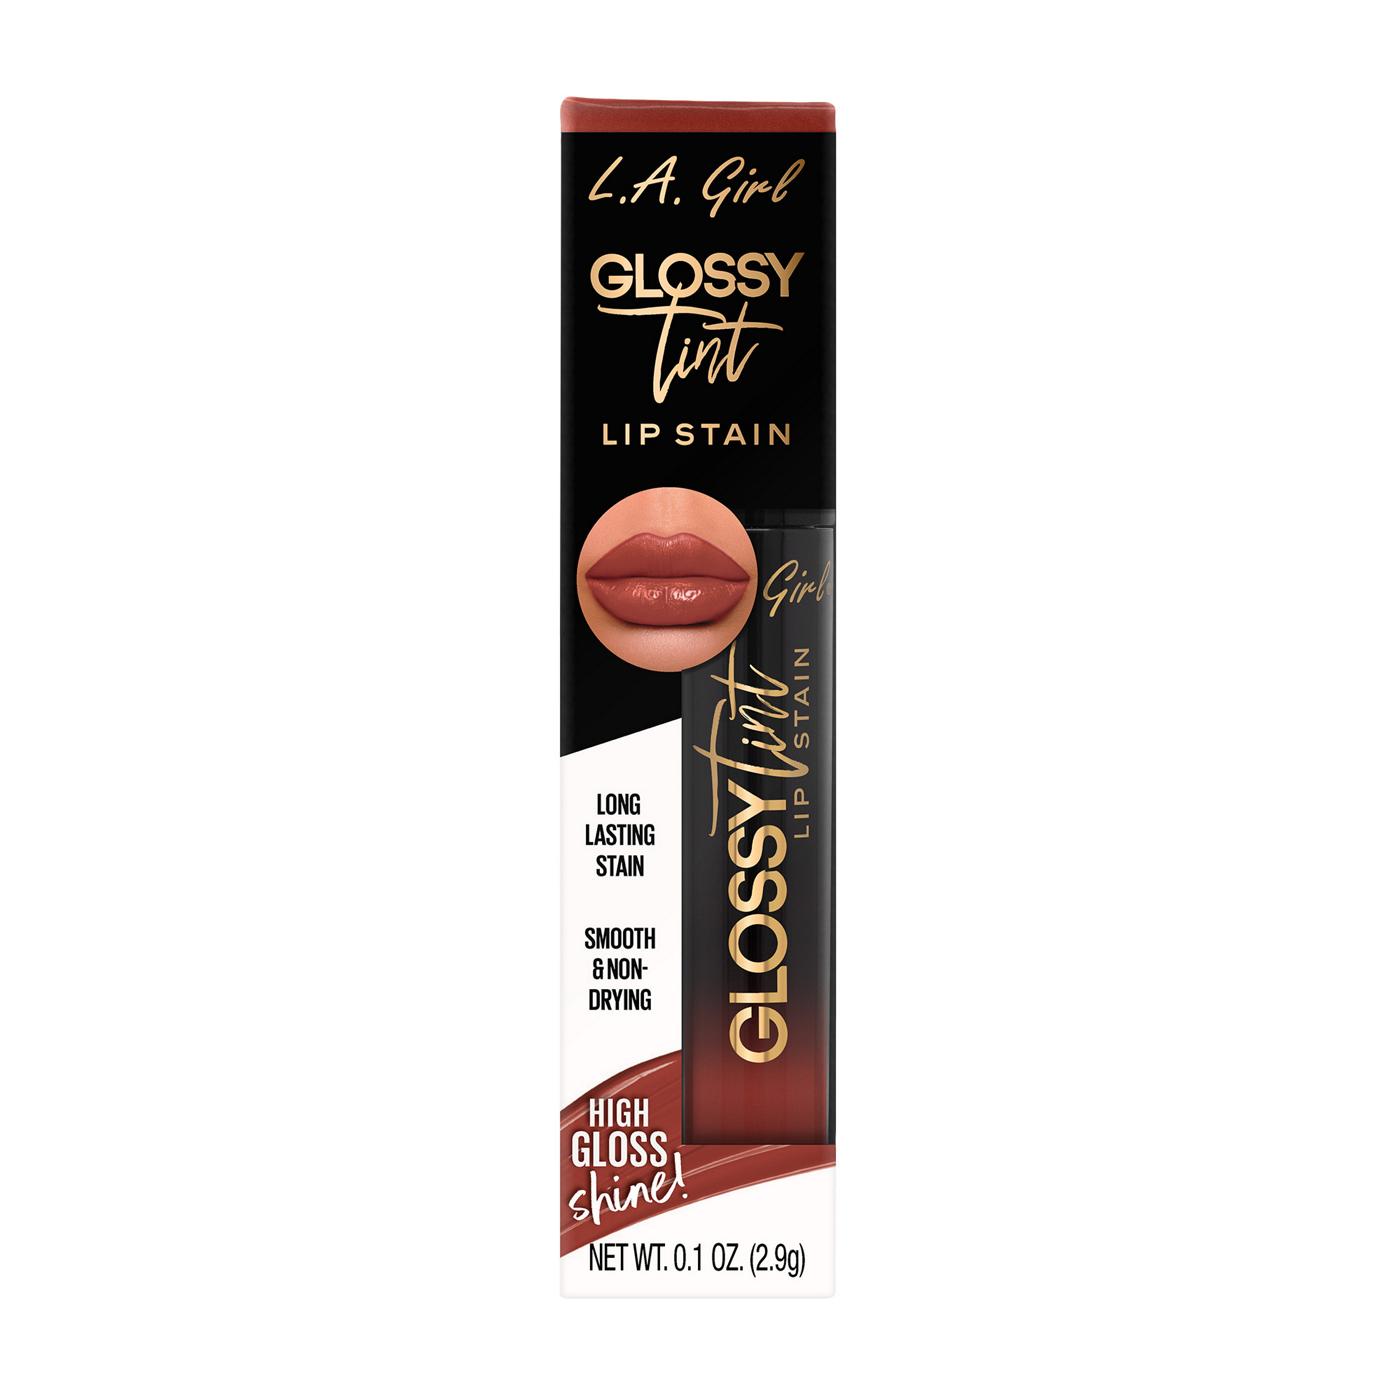 L.A. Girl Glossy Tint Lip Stain Divine; image 1 of 2